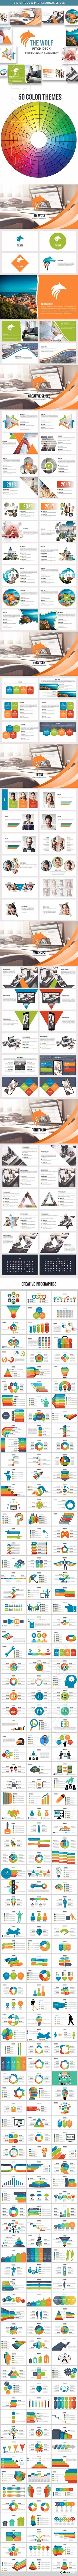 GraphicRiver - The Wolf - Multipurpose Powerpoint Presentation 22238297